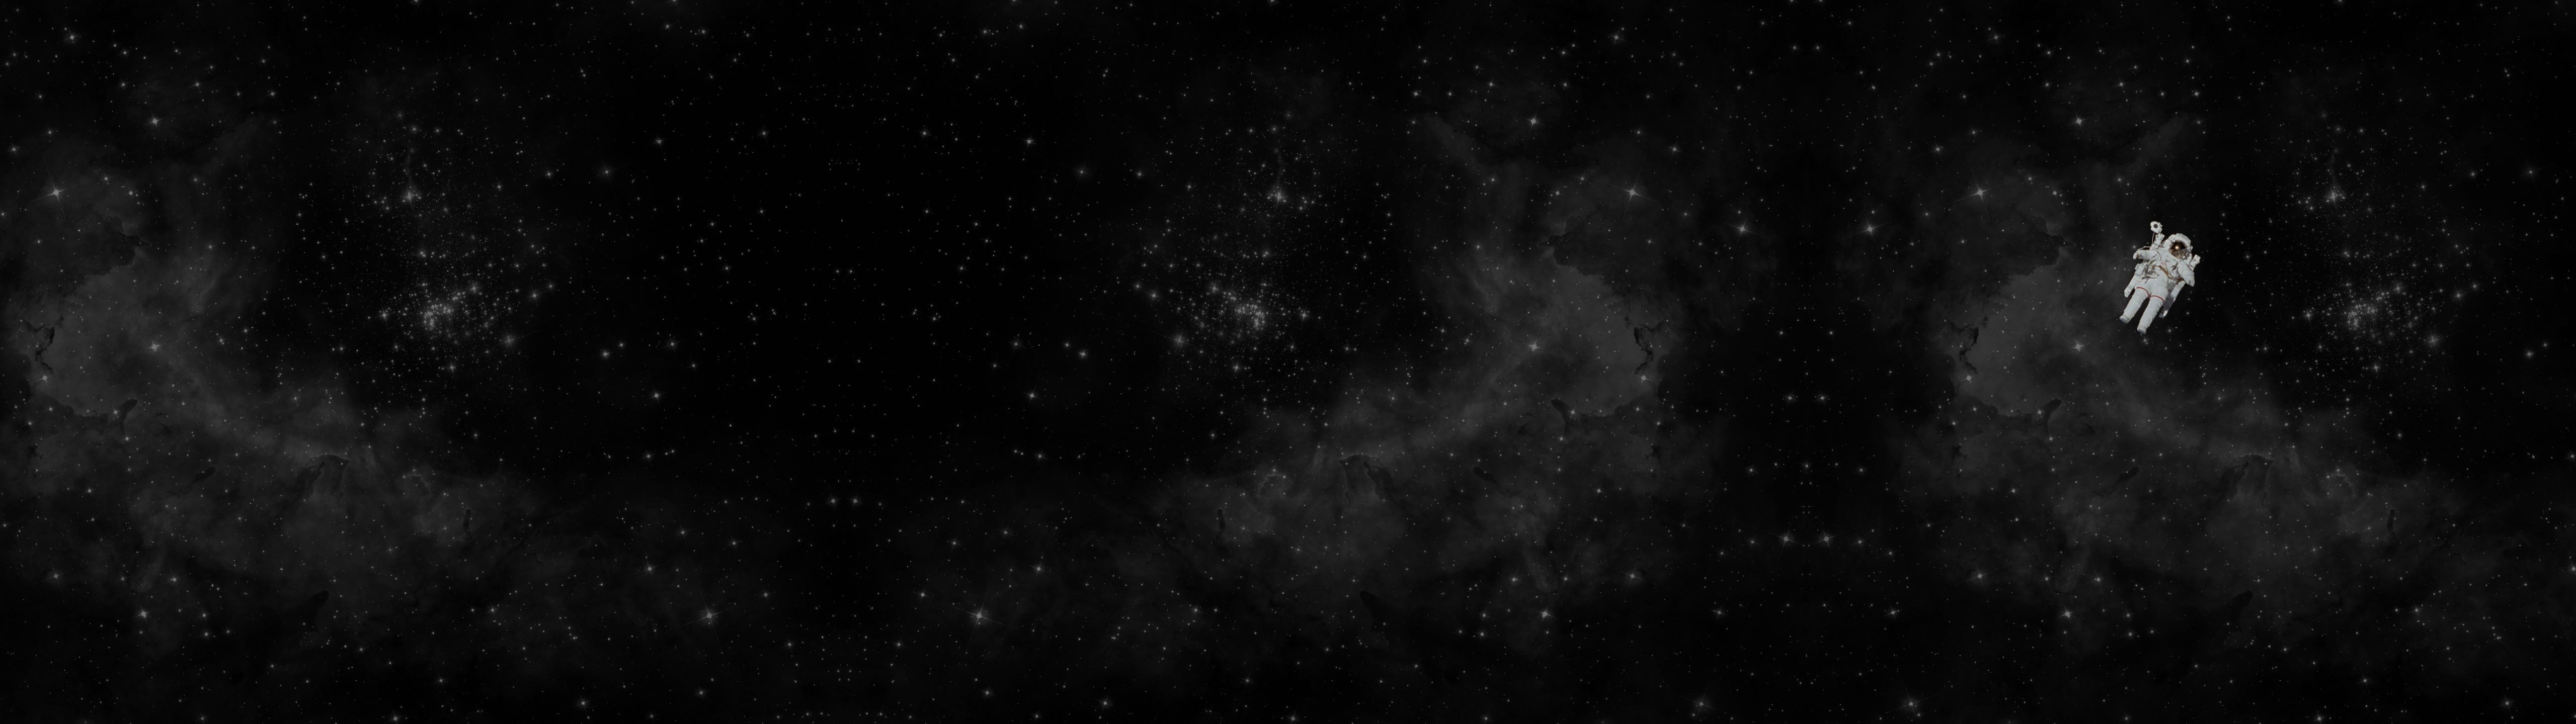 Space Wallpaper Free 5120x1440 Space Background